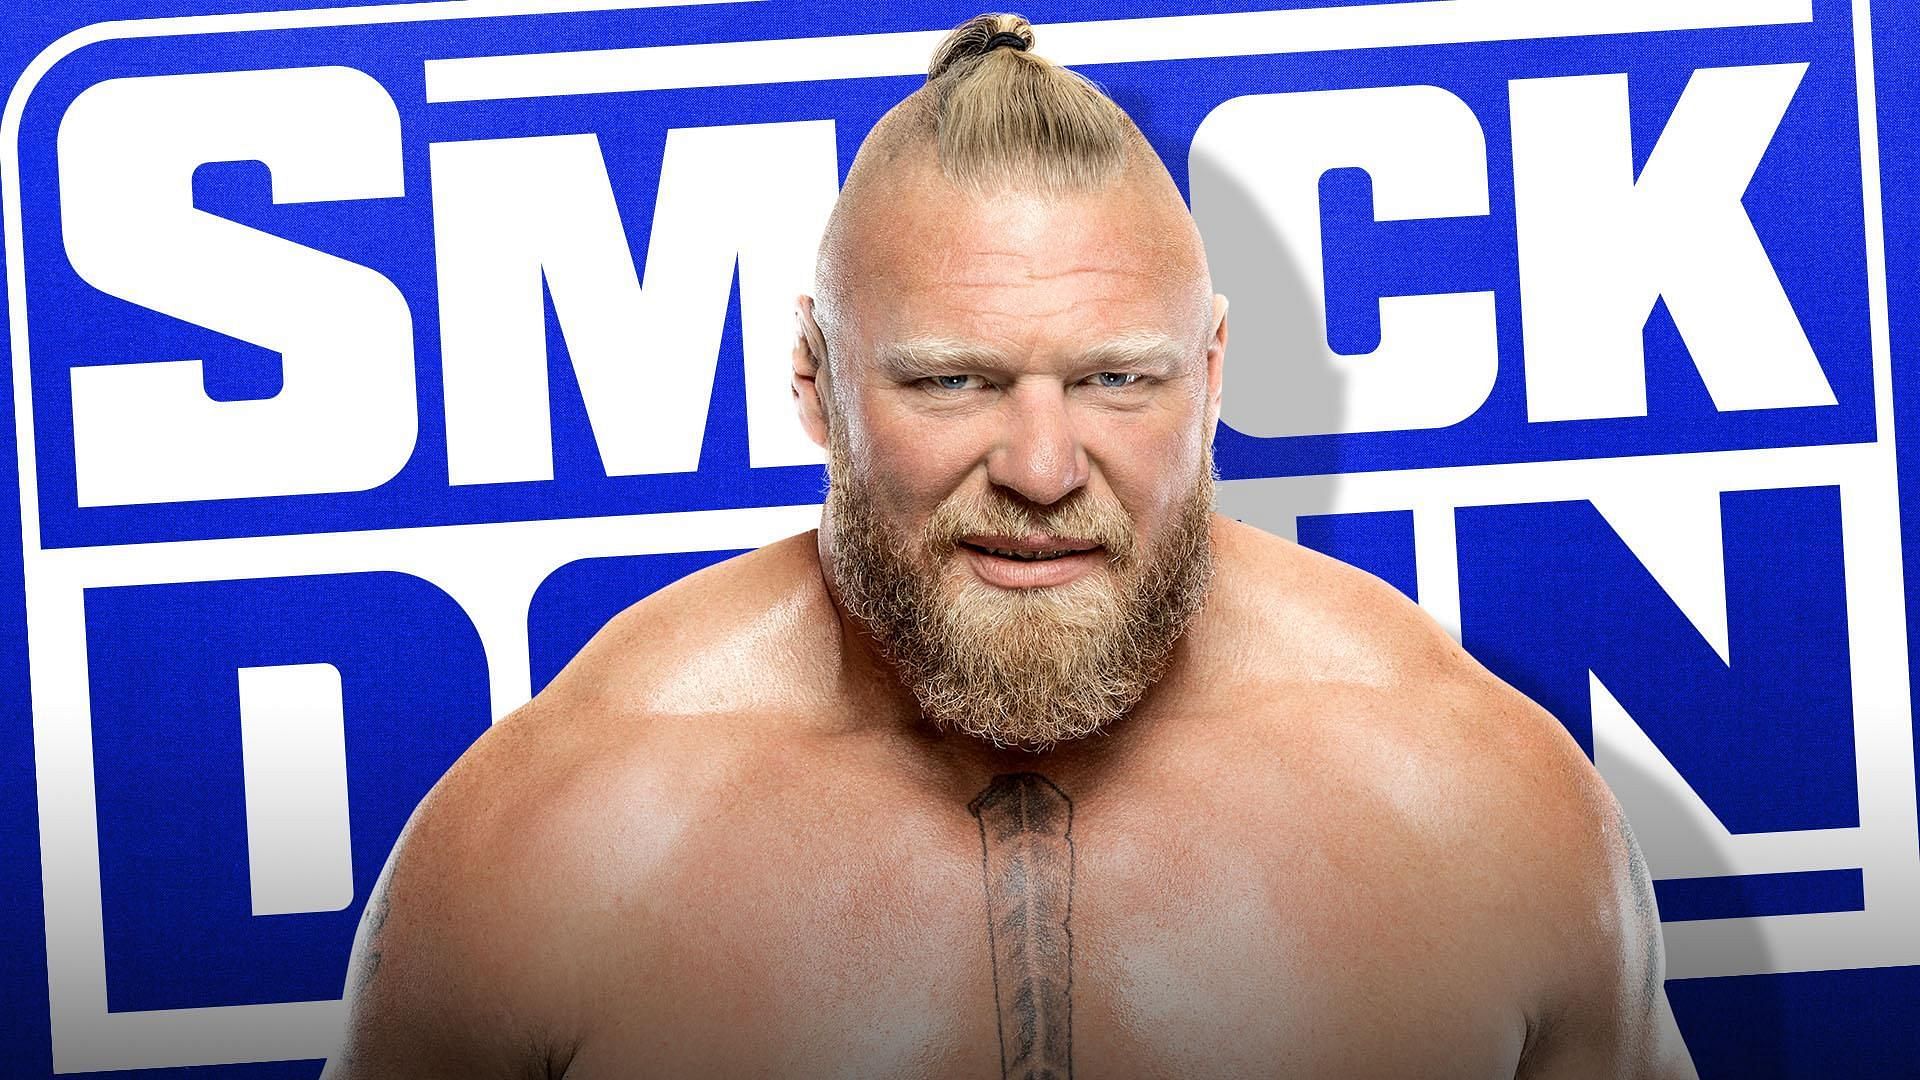 5 surprises for SmackDown: Unexpected star to align with Roman Reigns to take out Brock Lesnar, Huge betrayal to take place with 4-time world champion and new superstar?